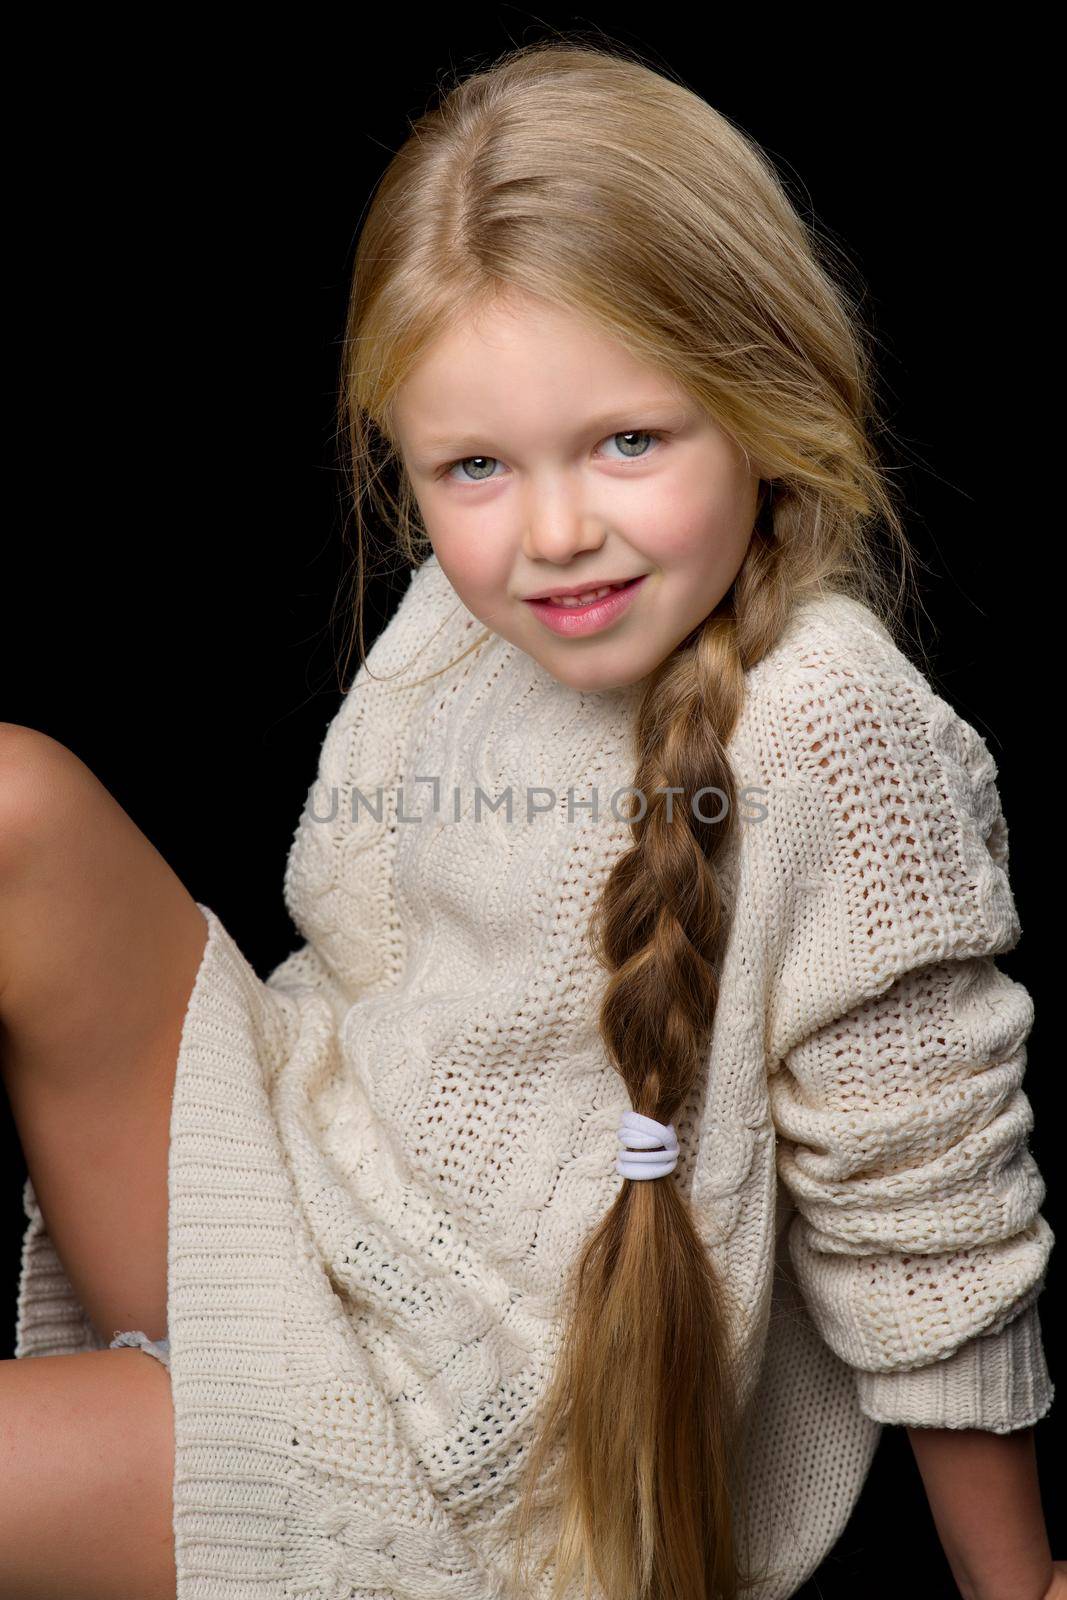 Close up portrait of beautiful girl with braid. Smiling cute little girl wearing warm knitted jumper sitting on floor against black background in studio